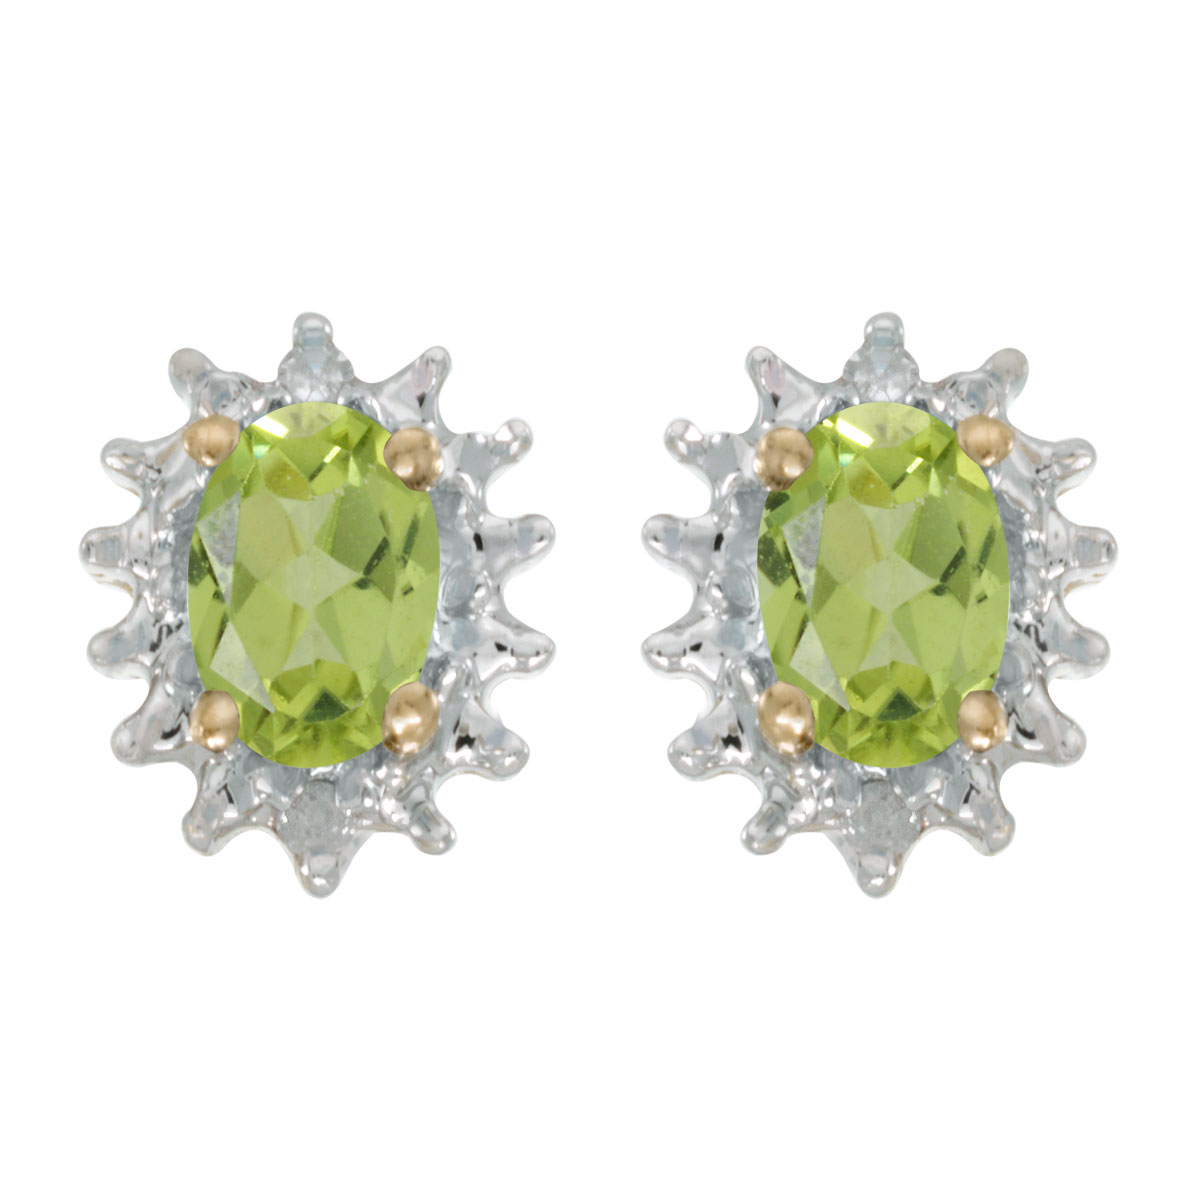 These 14k yellow gold oval peridot and diamond earrings feature 6x4 mm genuine natural peridots w...